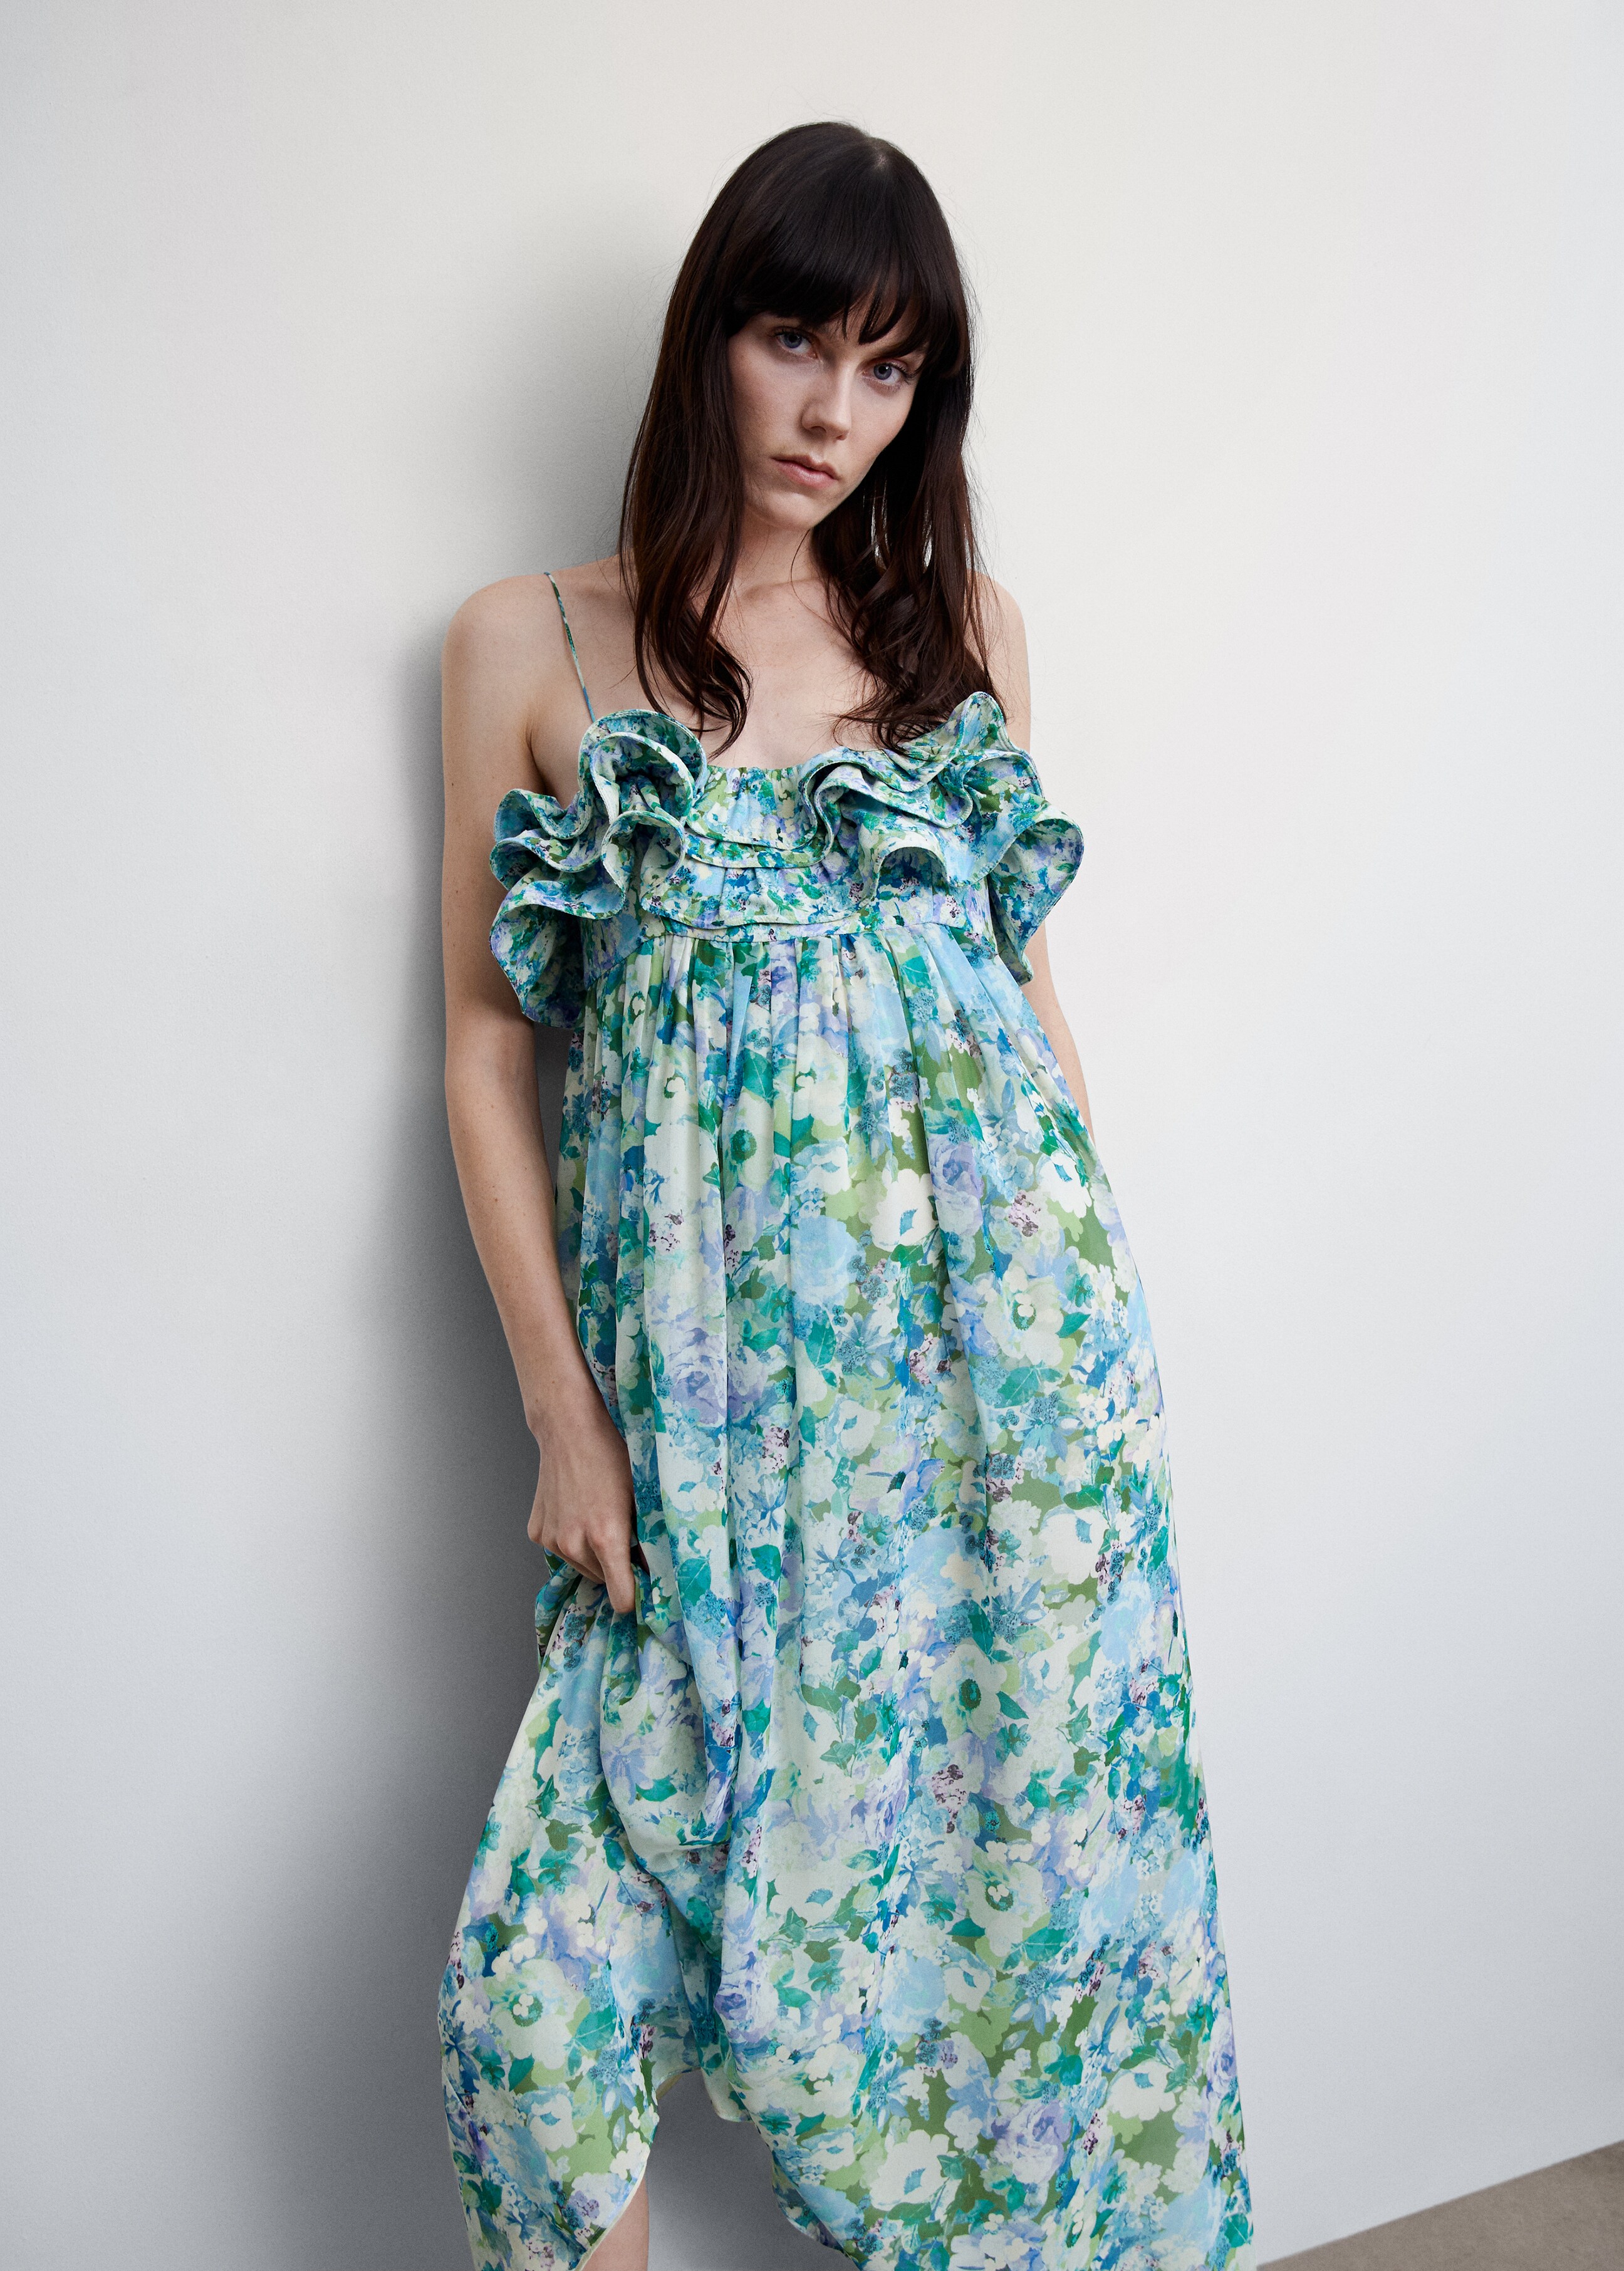 Floral ruffled dress - Details of the article 2